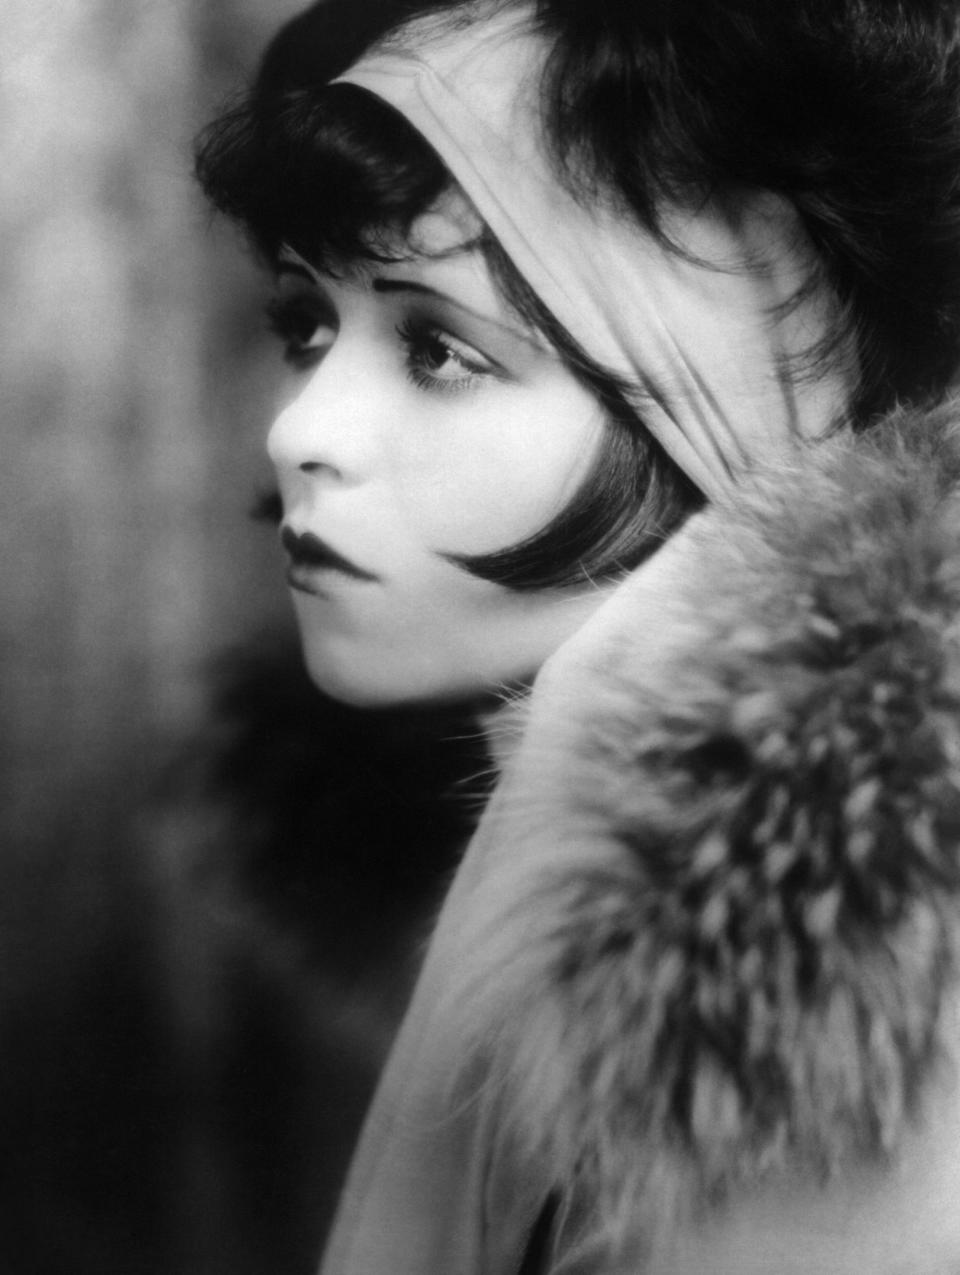 Clara Bow photographed in 1926 at the height of her fame as a silent film star.